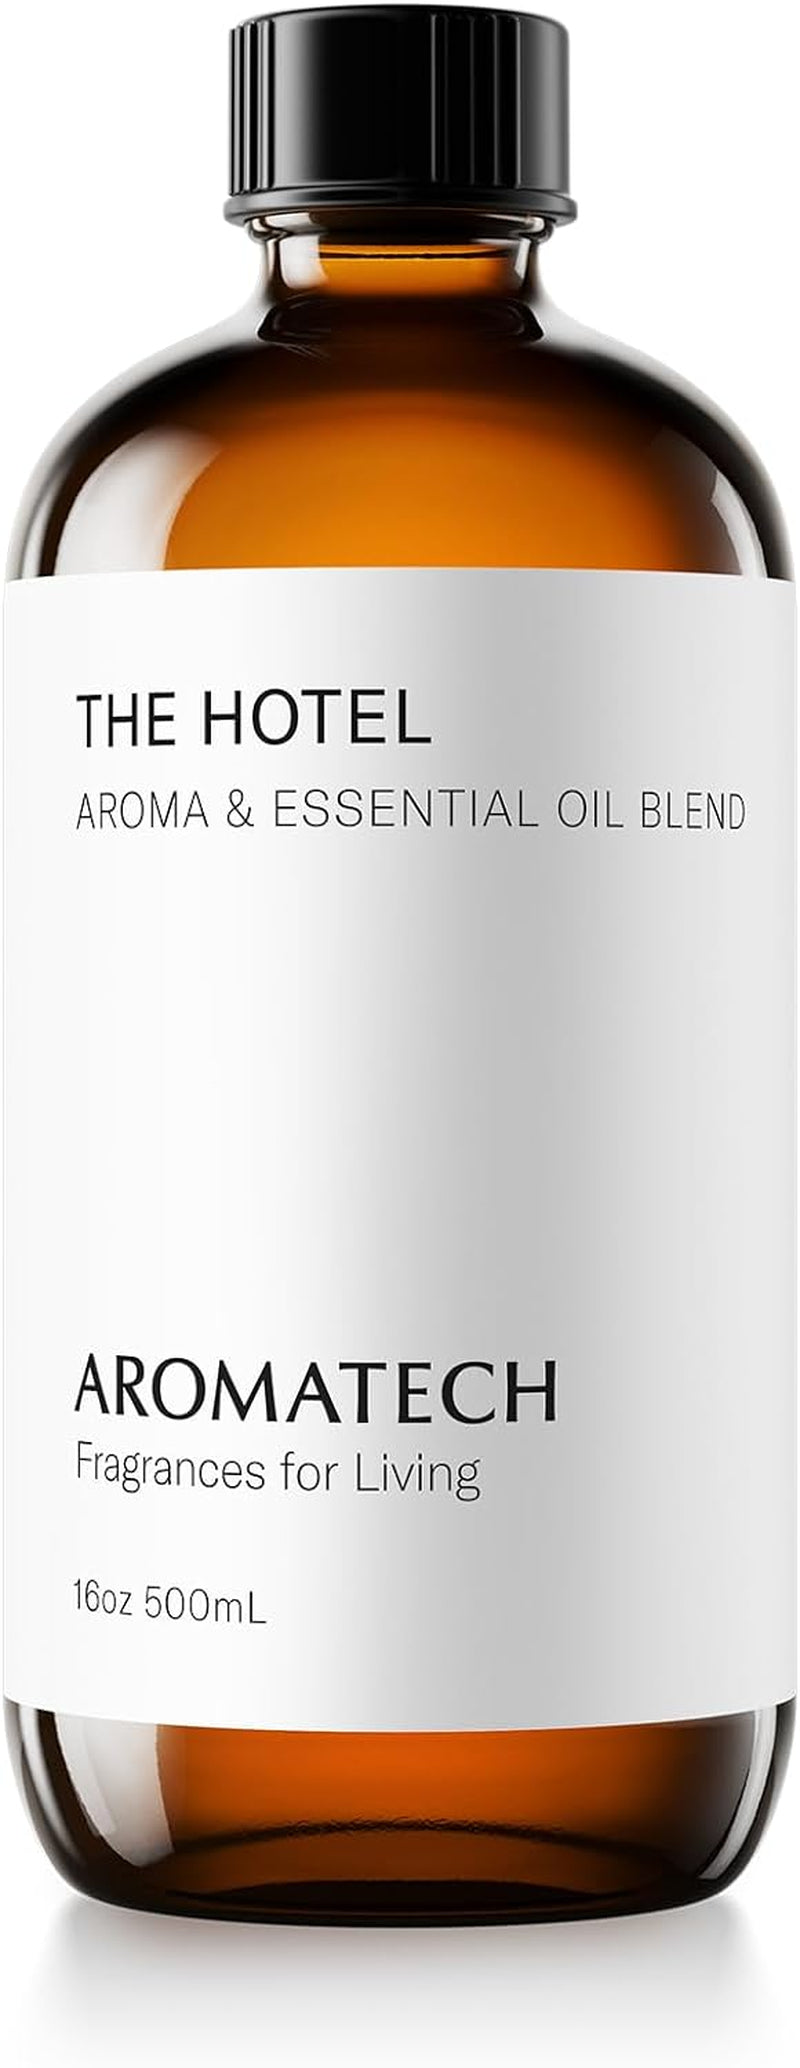 the Hotel Aroma Essential Oil Blend Stocking Stuffers, Aromatherapy Diffuser Oil, Holiday Gifts with Peach, Lavender & Pine, for Diffuser, Humidifier - 16 Fl Oz, 500 Ml